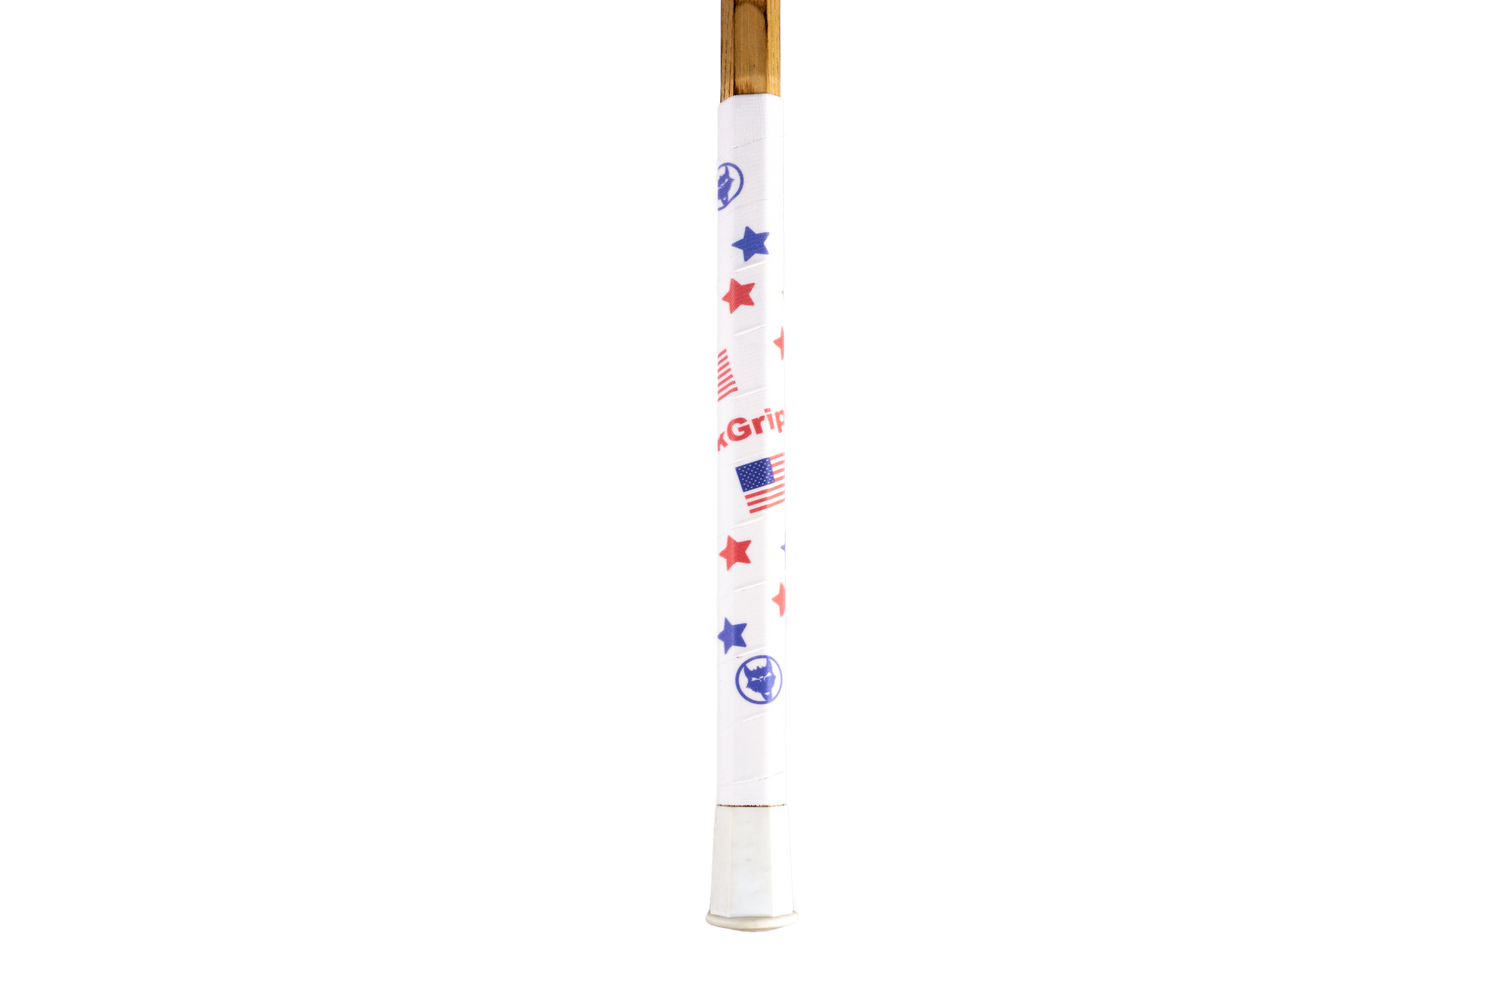 American Flag Lacrosse Grip. White lacrosse stick tape with USA stars